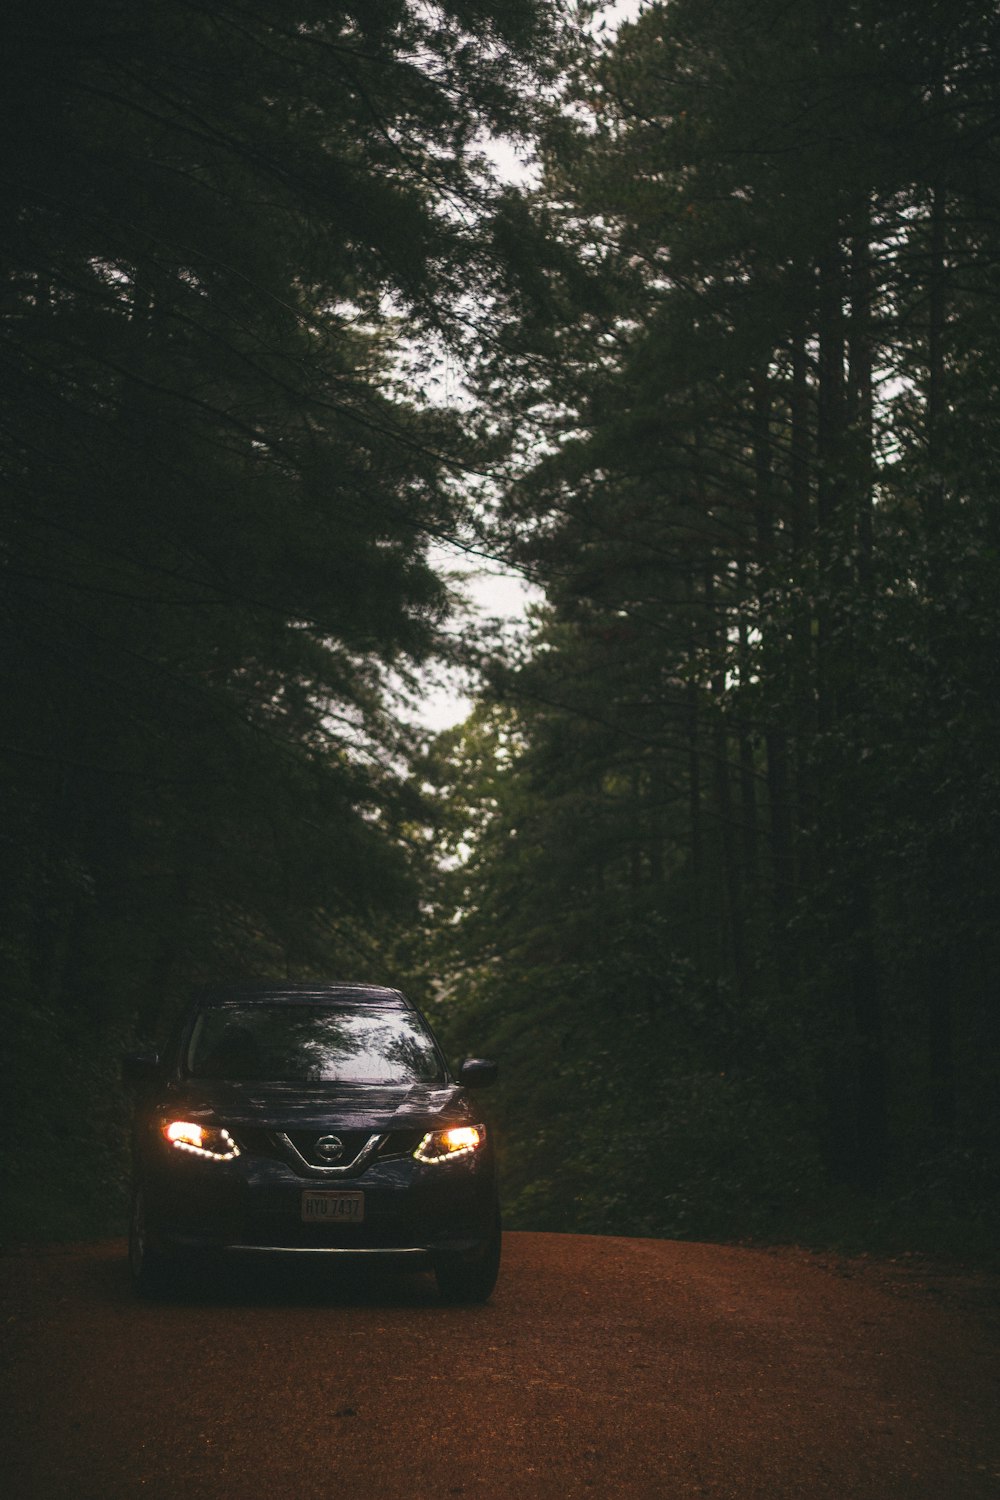 black car in the middle of the forest during night time